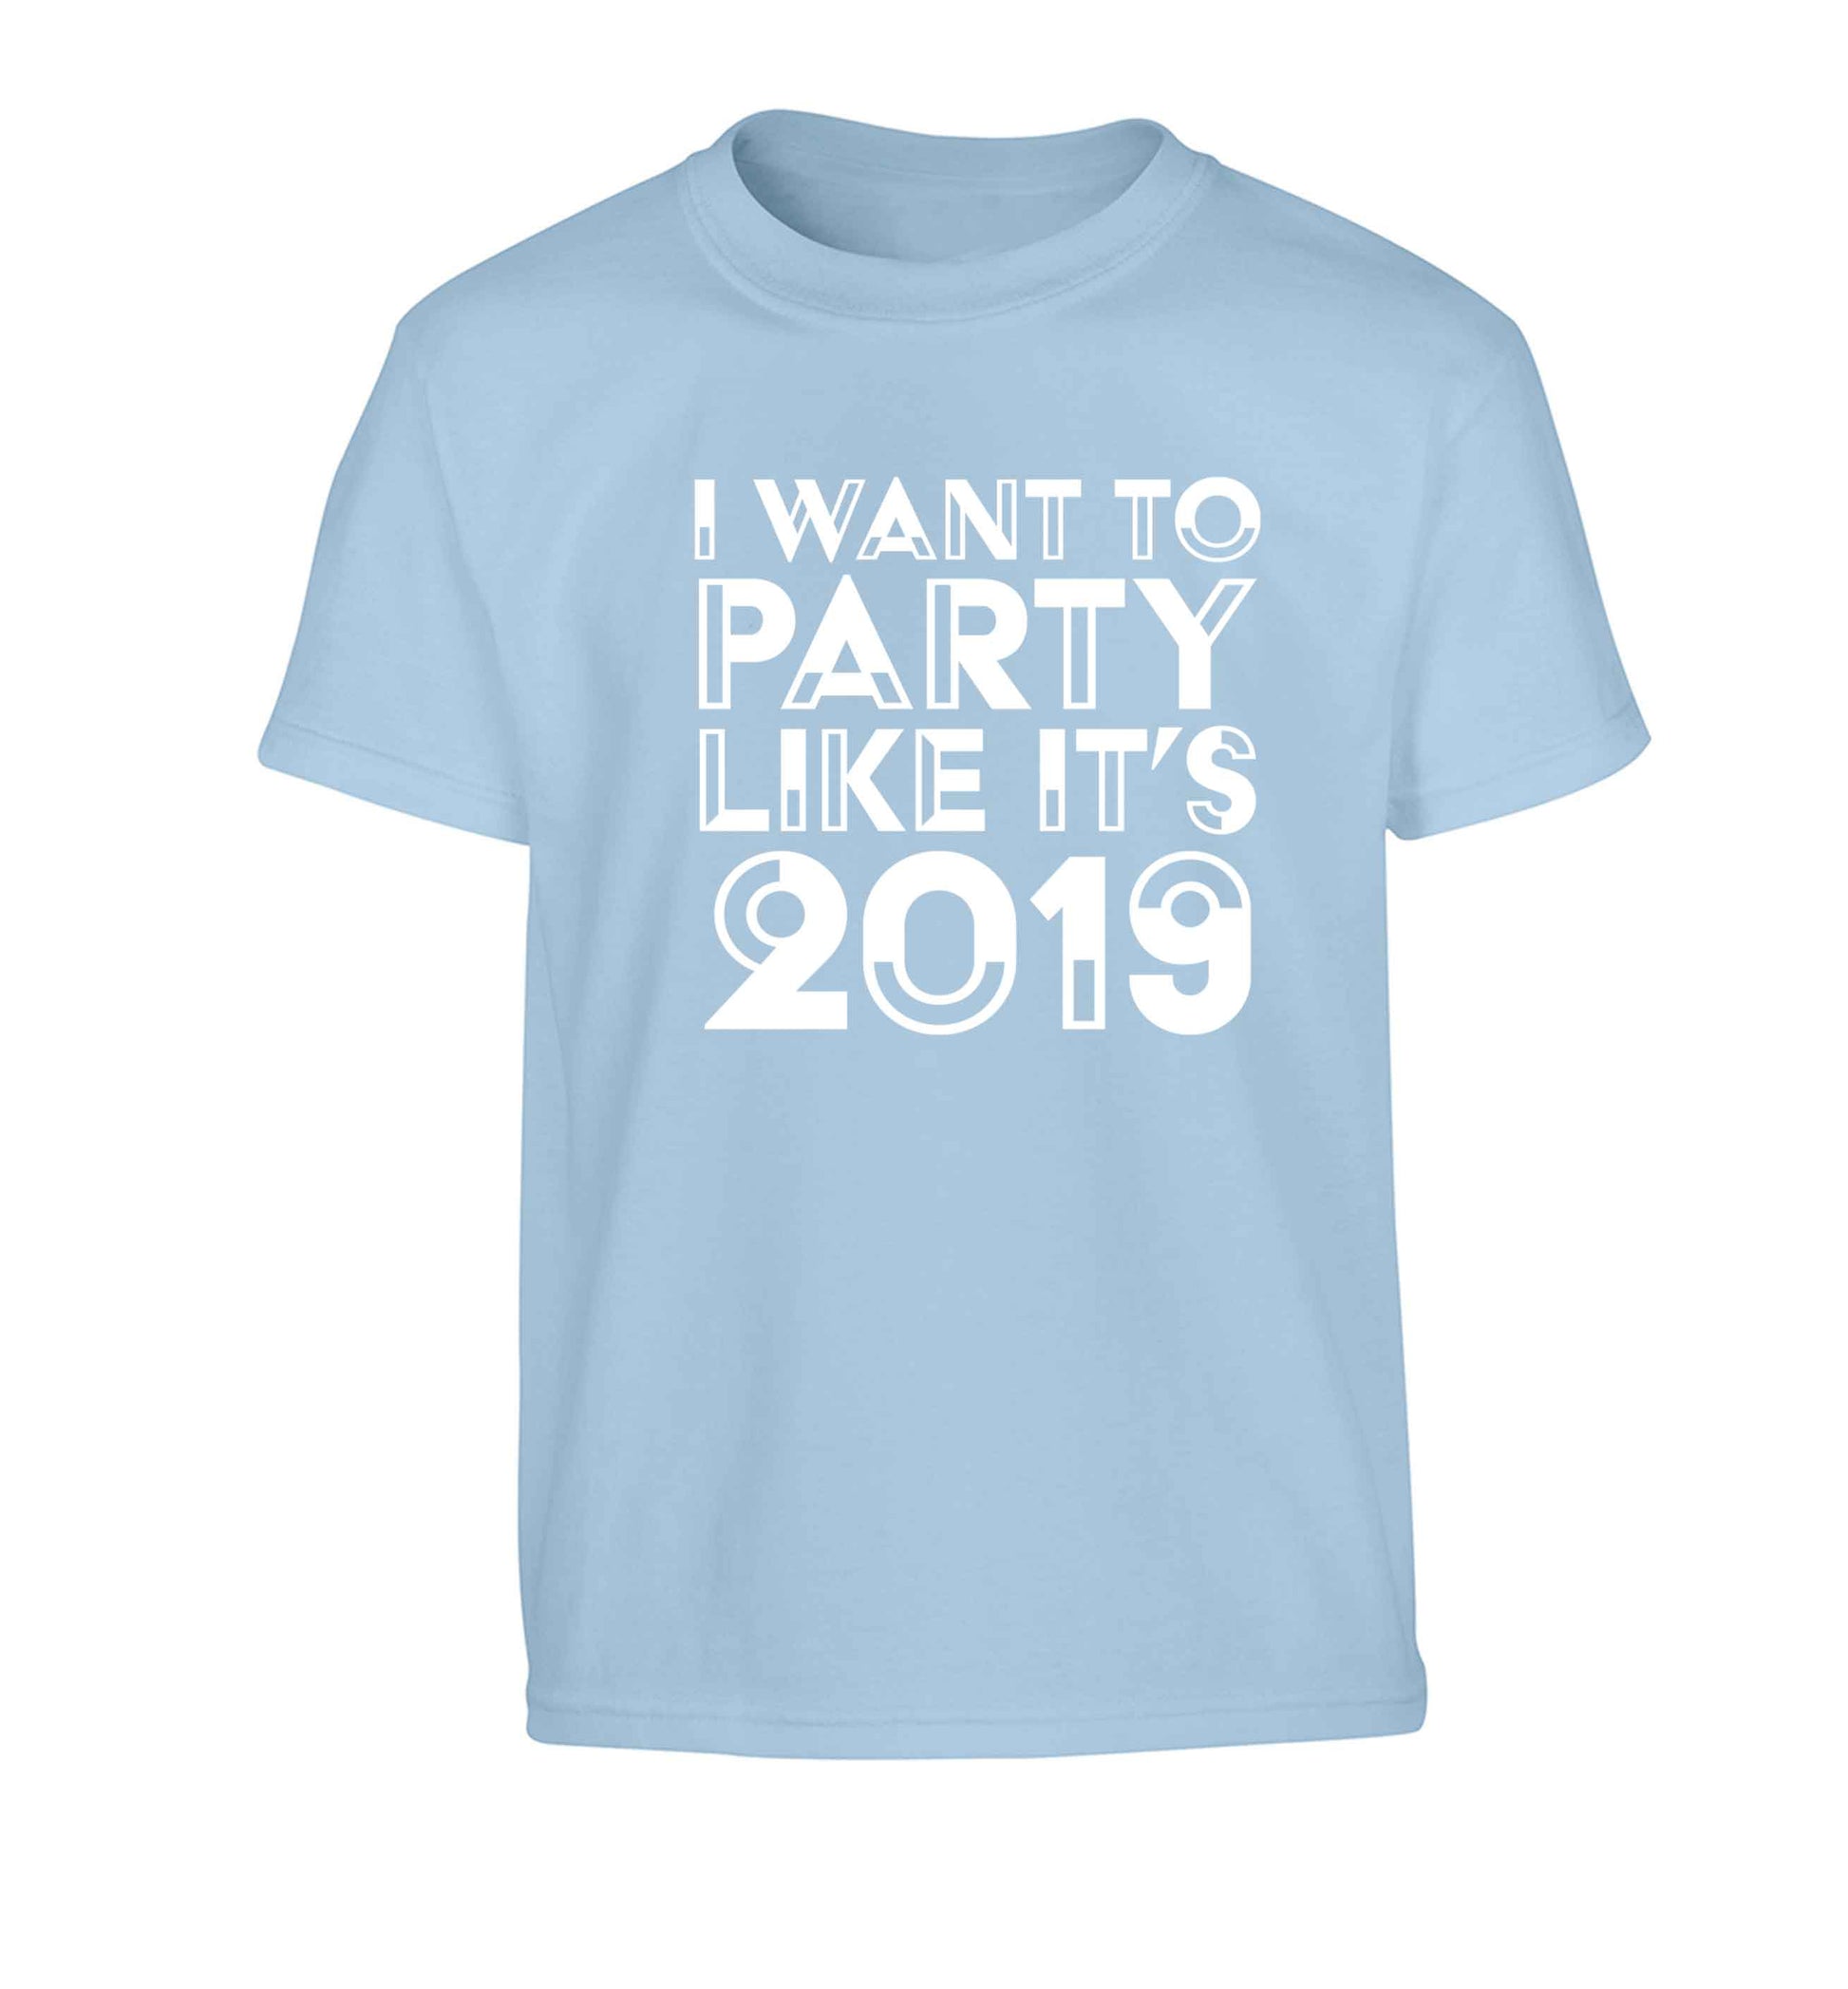 I want to party like it's 2019 Children's light blue Tshirt 12-13 Years